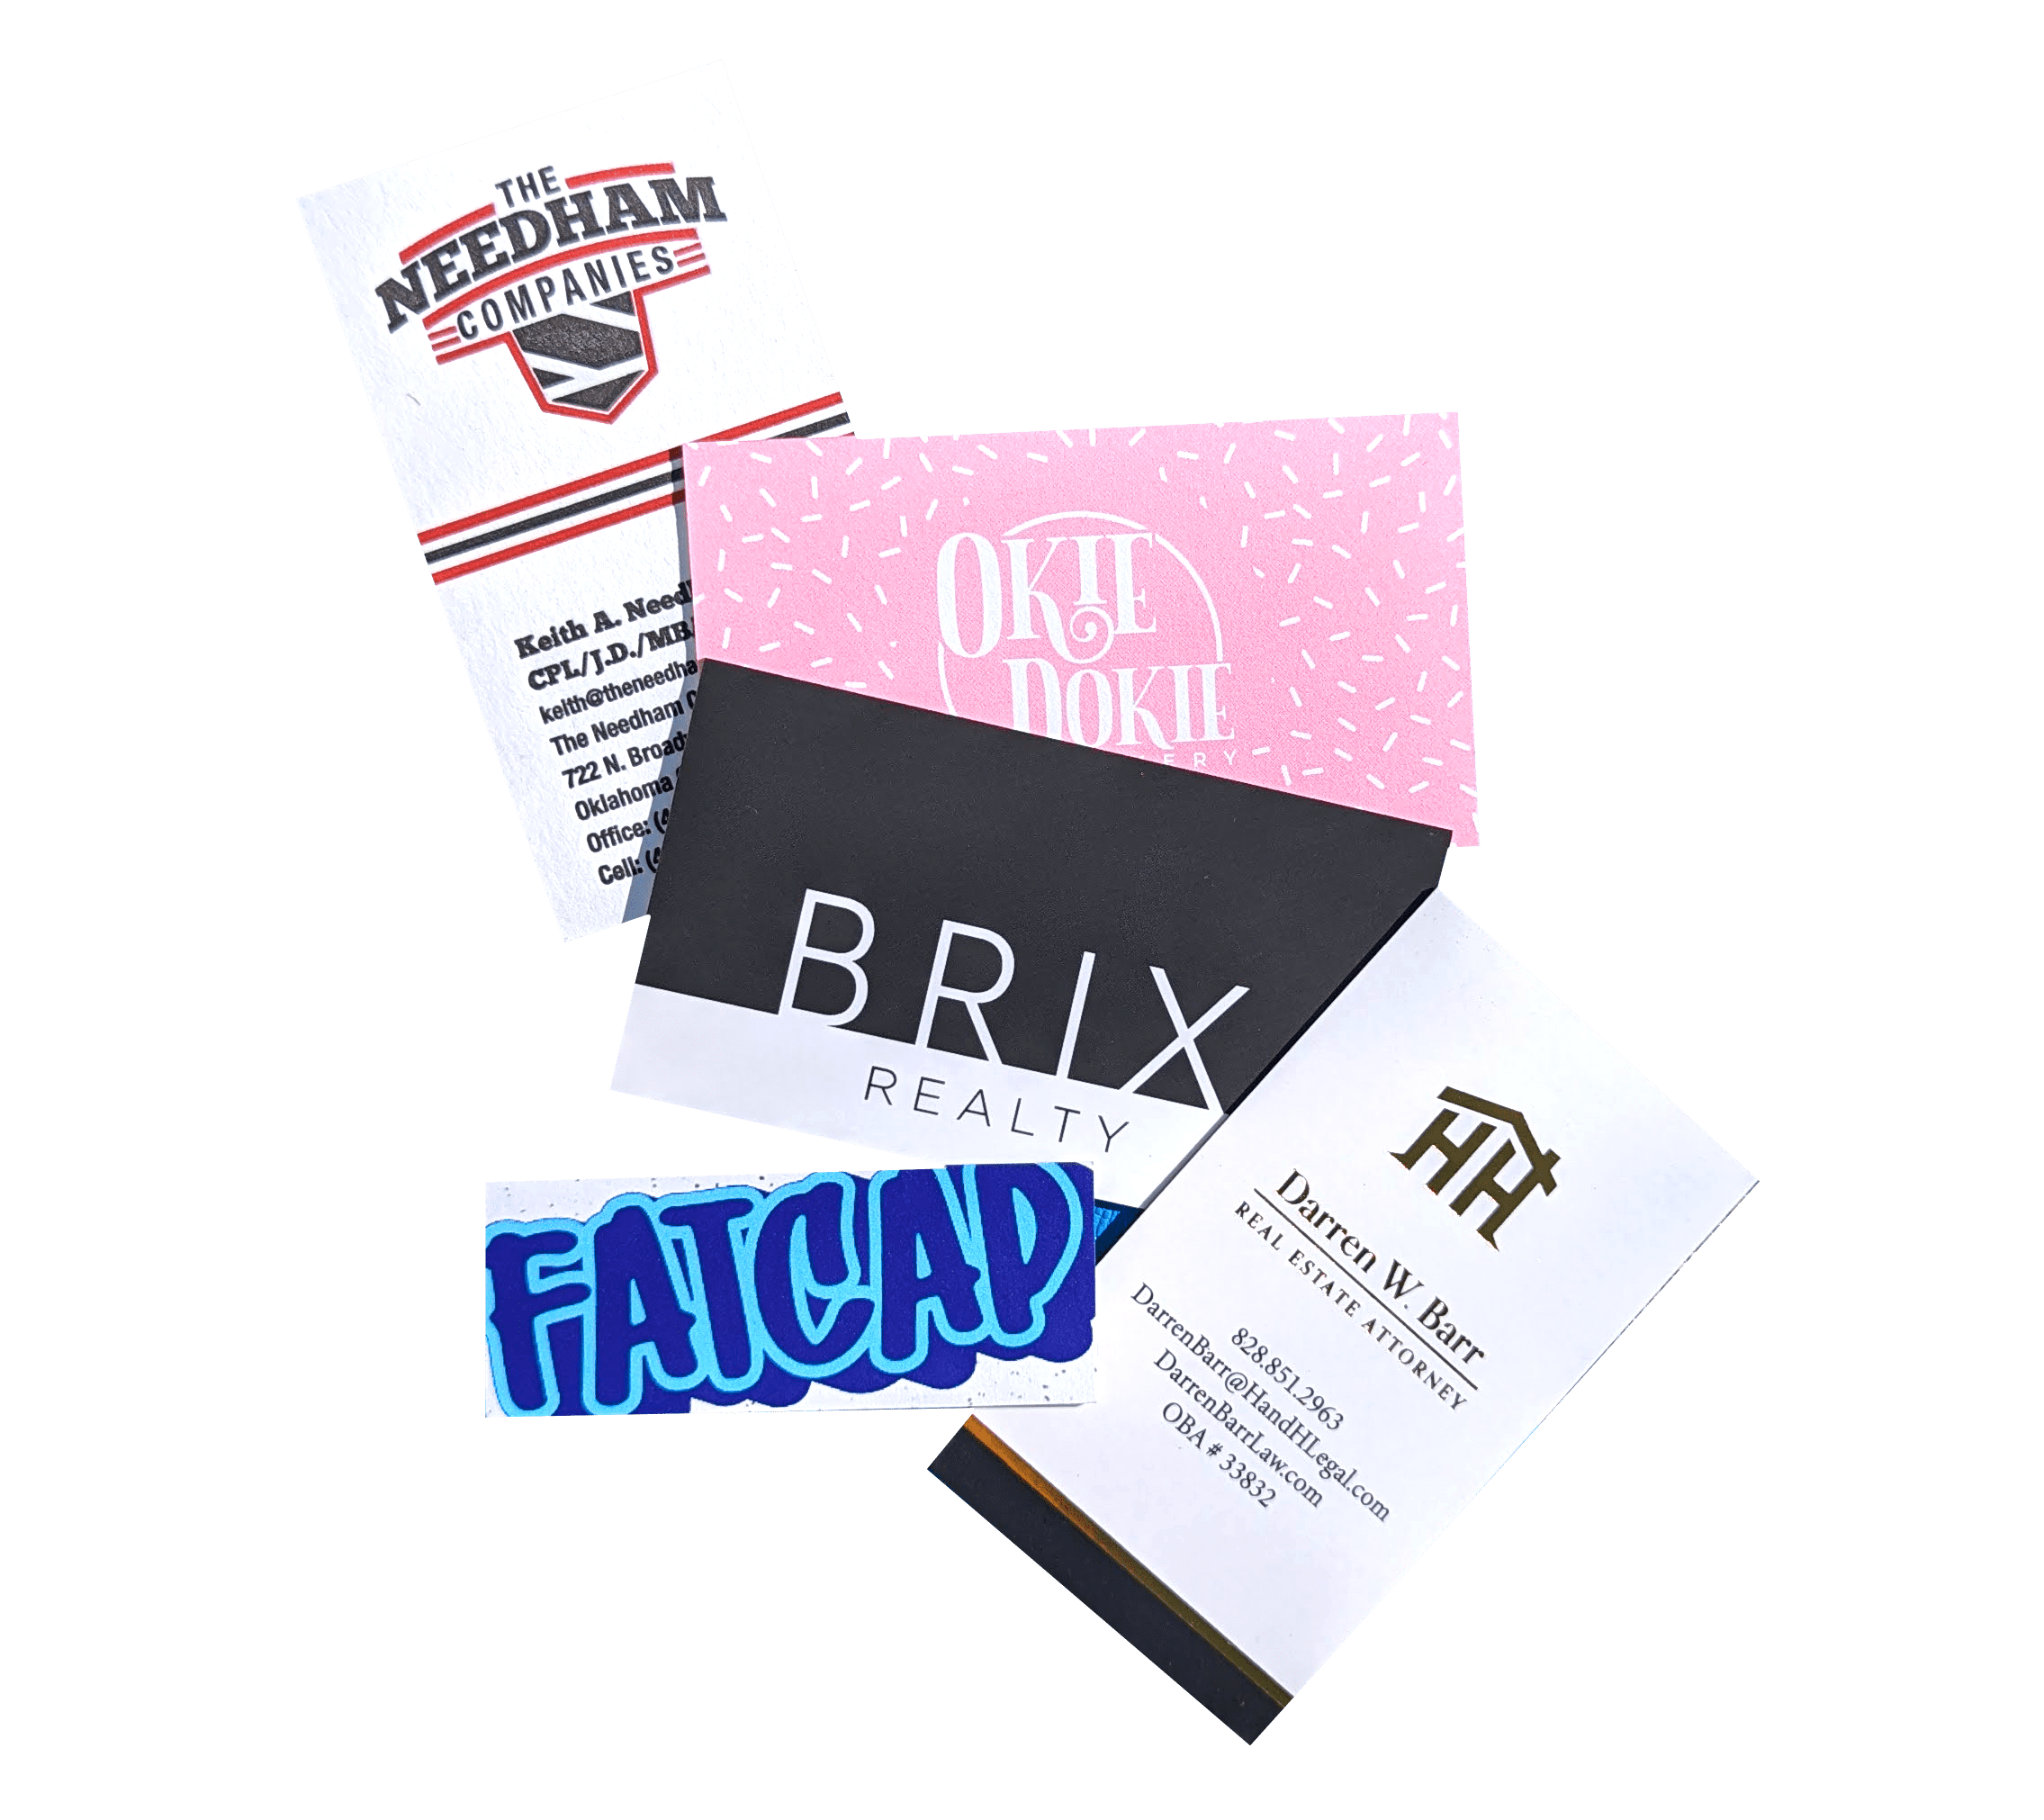 Various business cards scattered. Pictured is the Needham Companies, Okie Dokie Bakery, Brix Realty, Fatcap, and HandHeim Legal